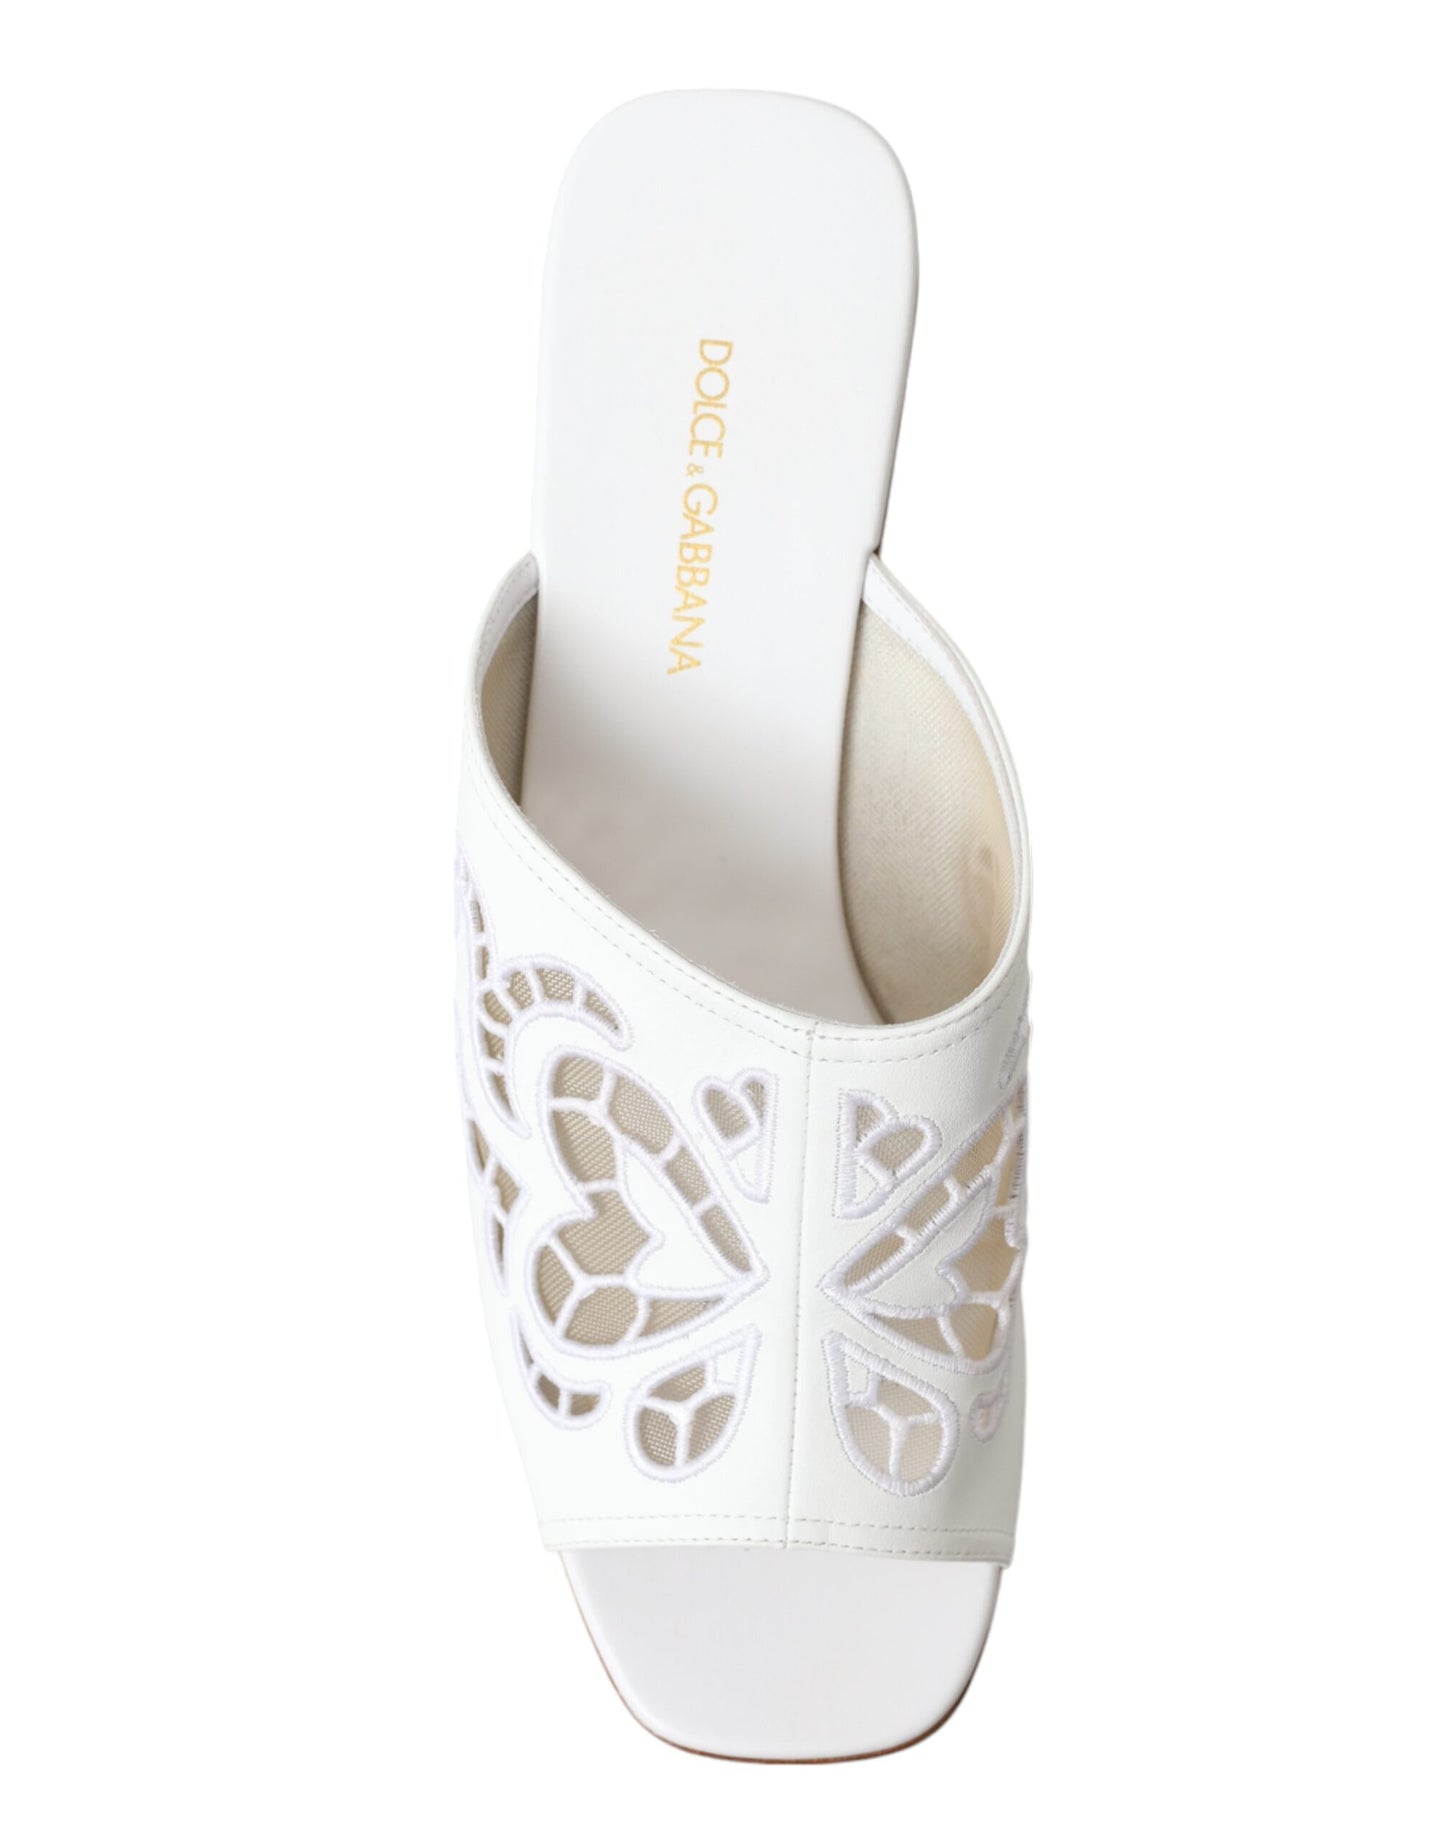 Chic White Leather Wedge Sandals